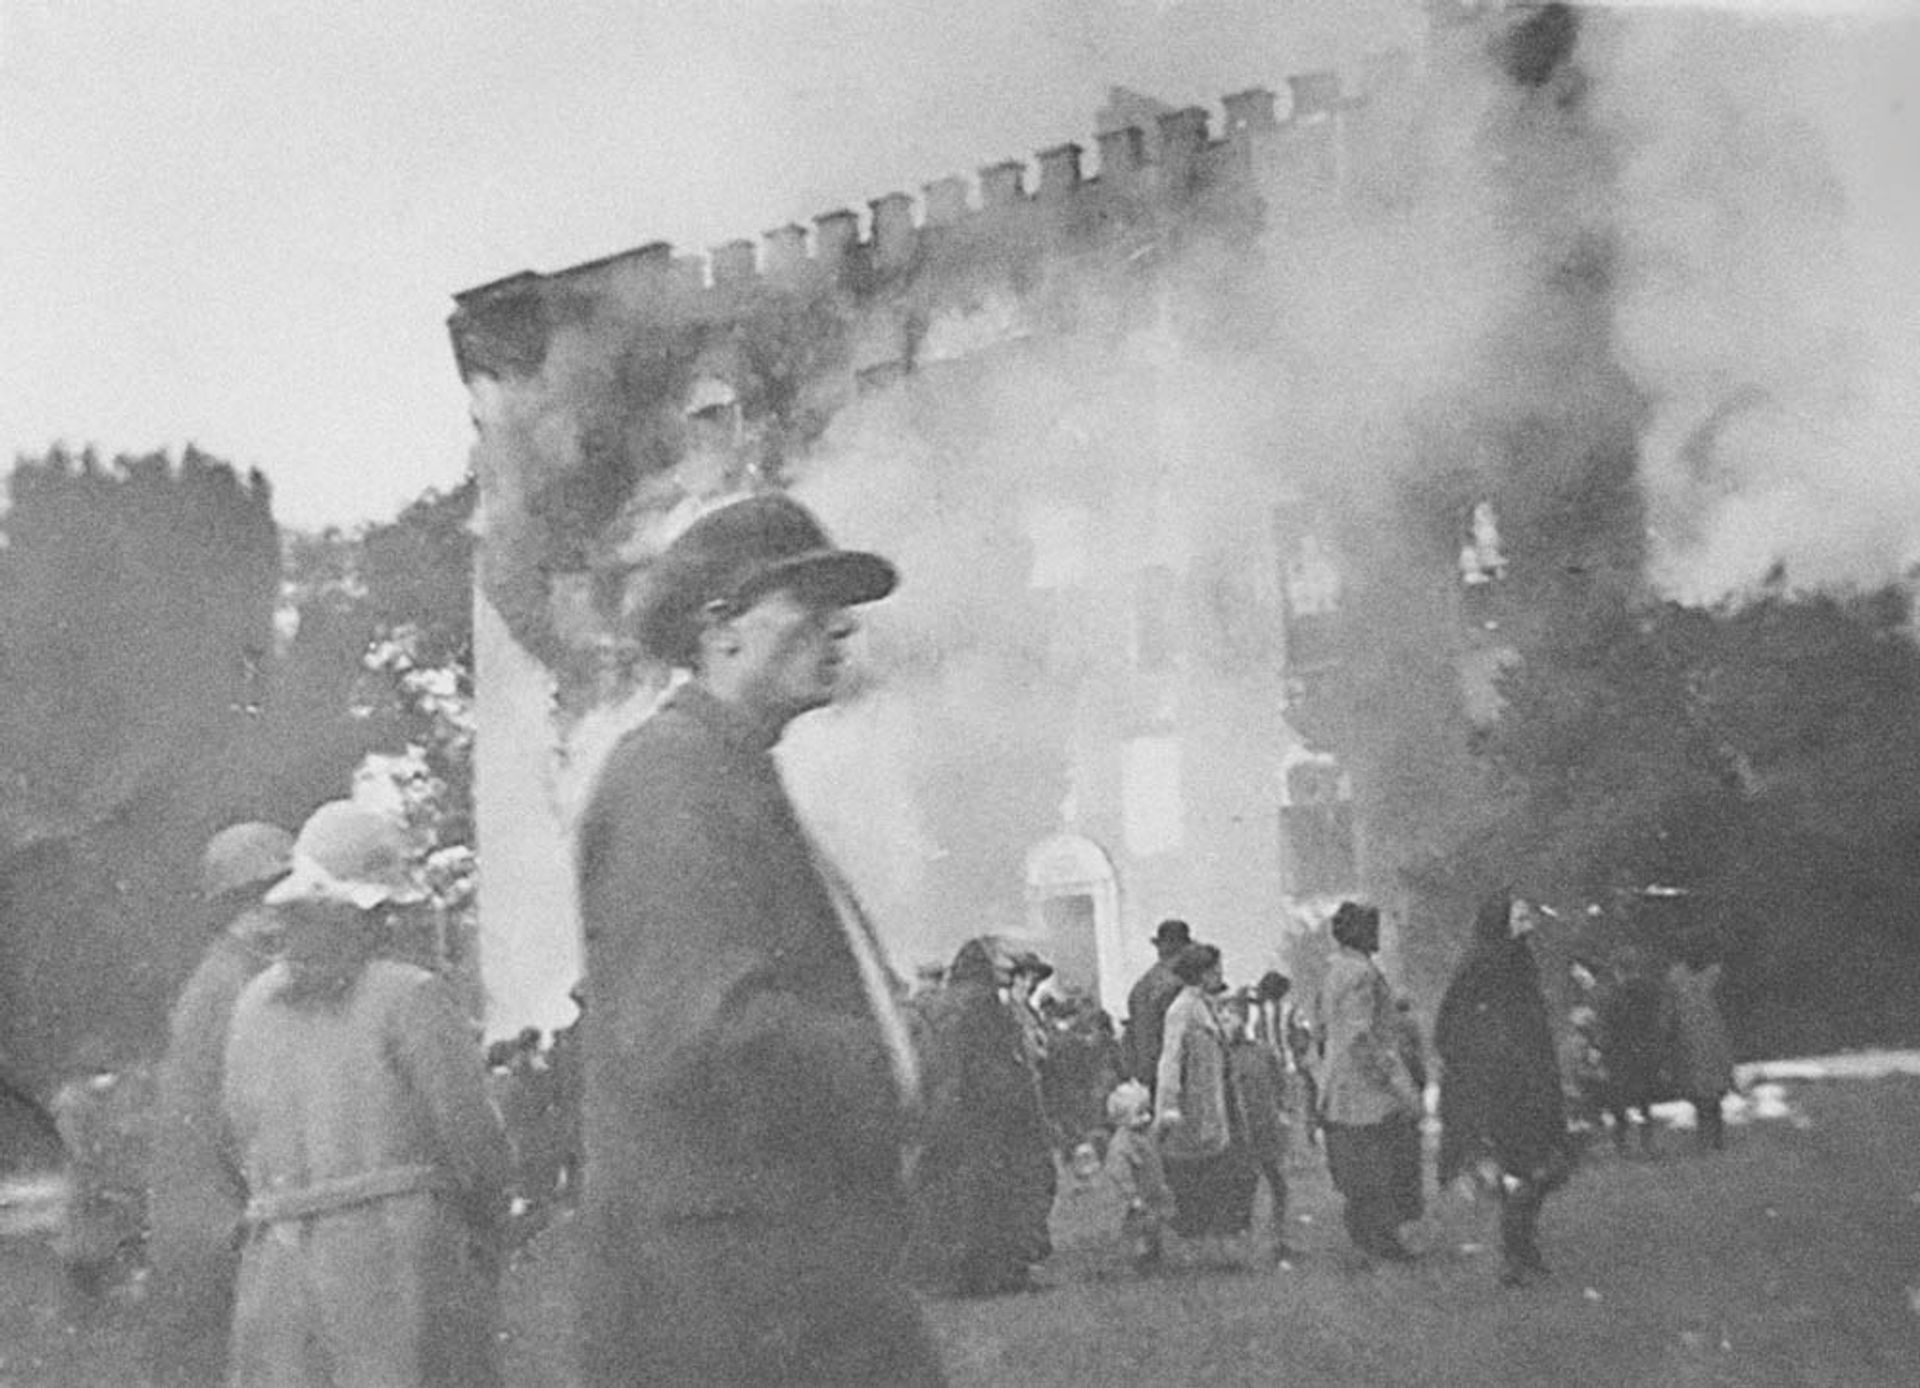 A time of revolution: Macroom Castle, County Cork, August 1922. This is a rare image of an Irish country house in the midst of burning Photo in the author’s possession